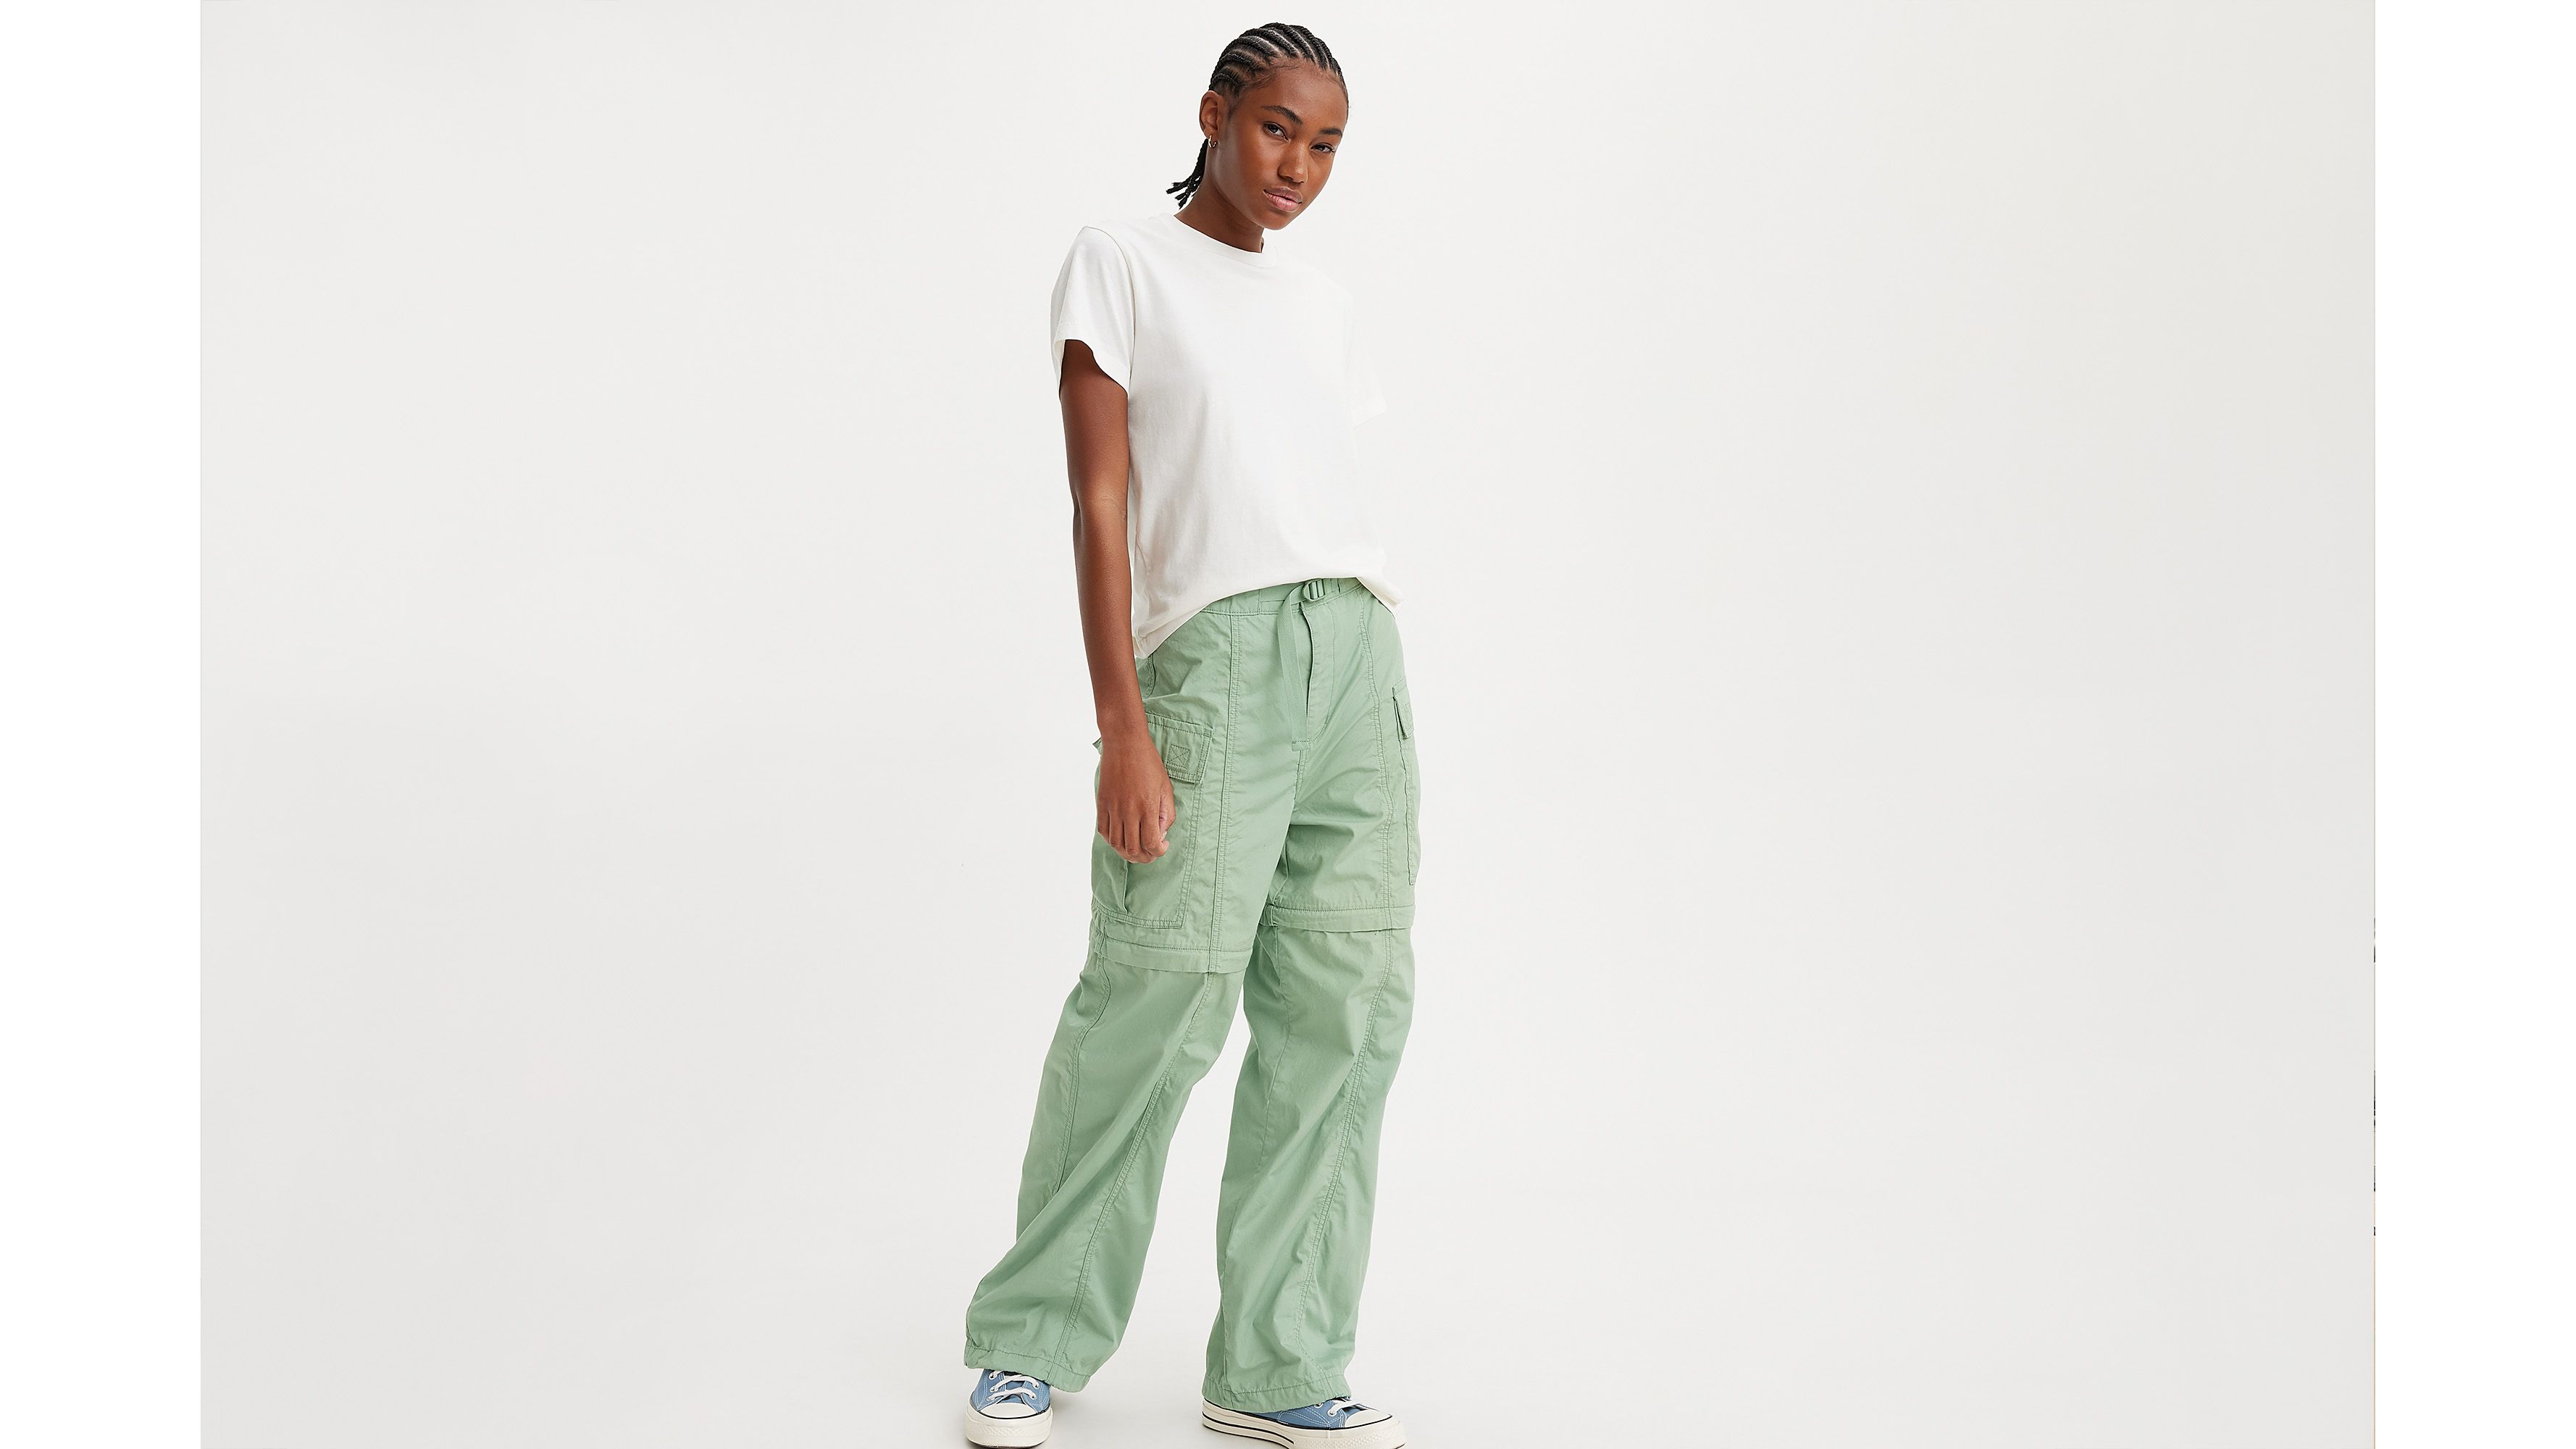 Shop Adjustable Drawstring Pants with great discounts and prices